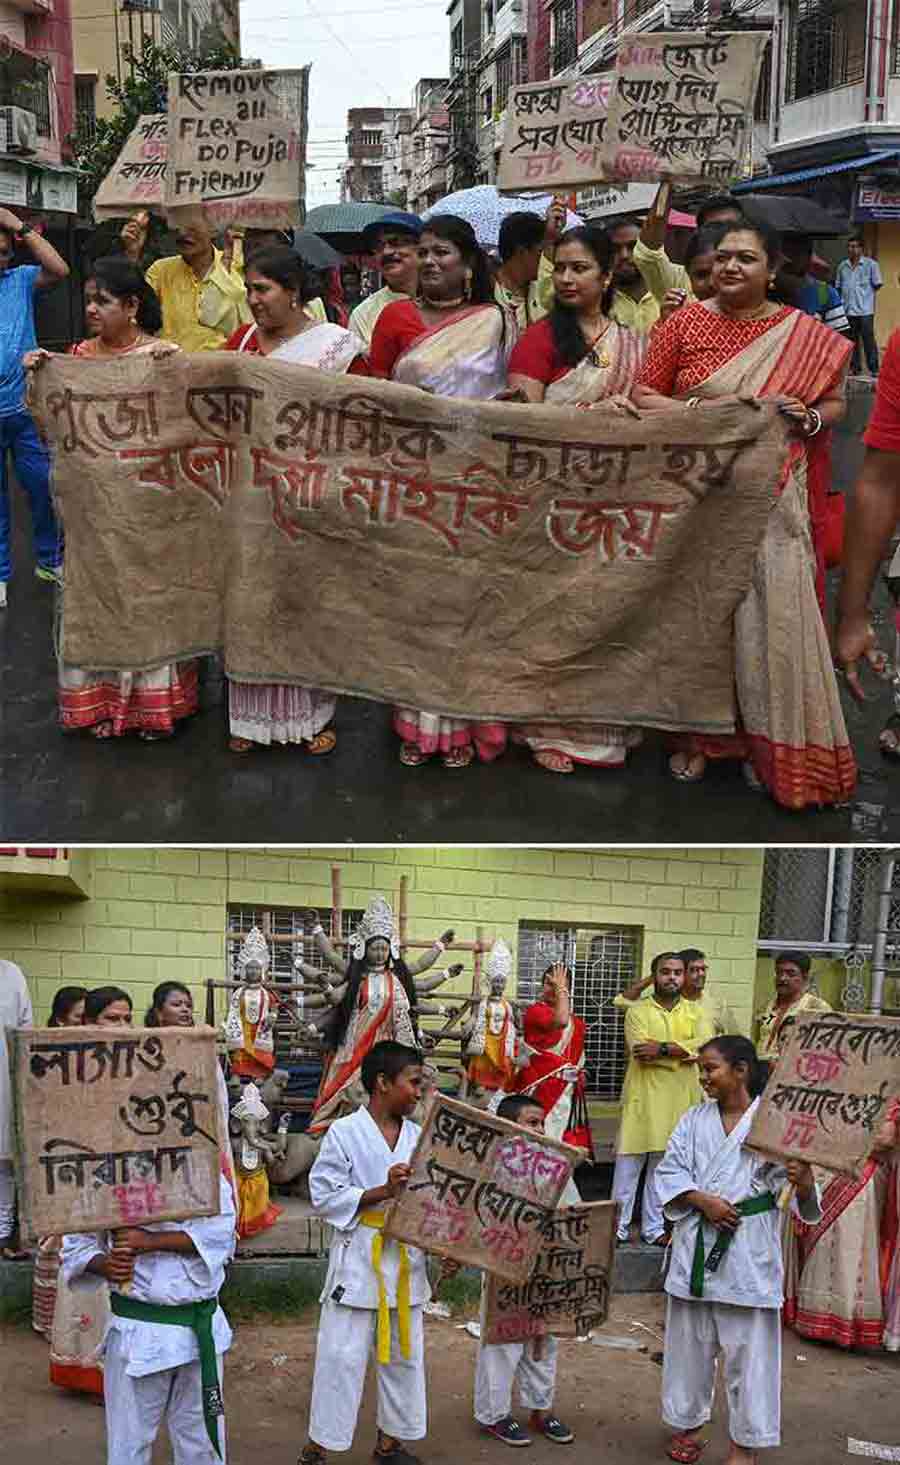 Members of Railpukur United Club, Baguiati, took out a procession on Saturday advocating the use of environment-friendly jute banners and posters during Durga Puja in West Bengal and spreading public awareness against the use of thermocol, plastic and flex by Puja organisers